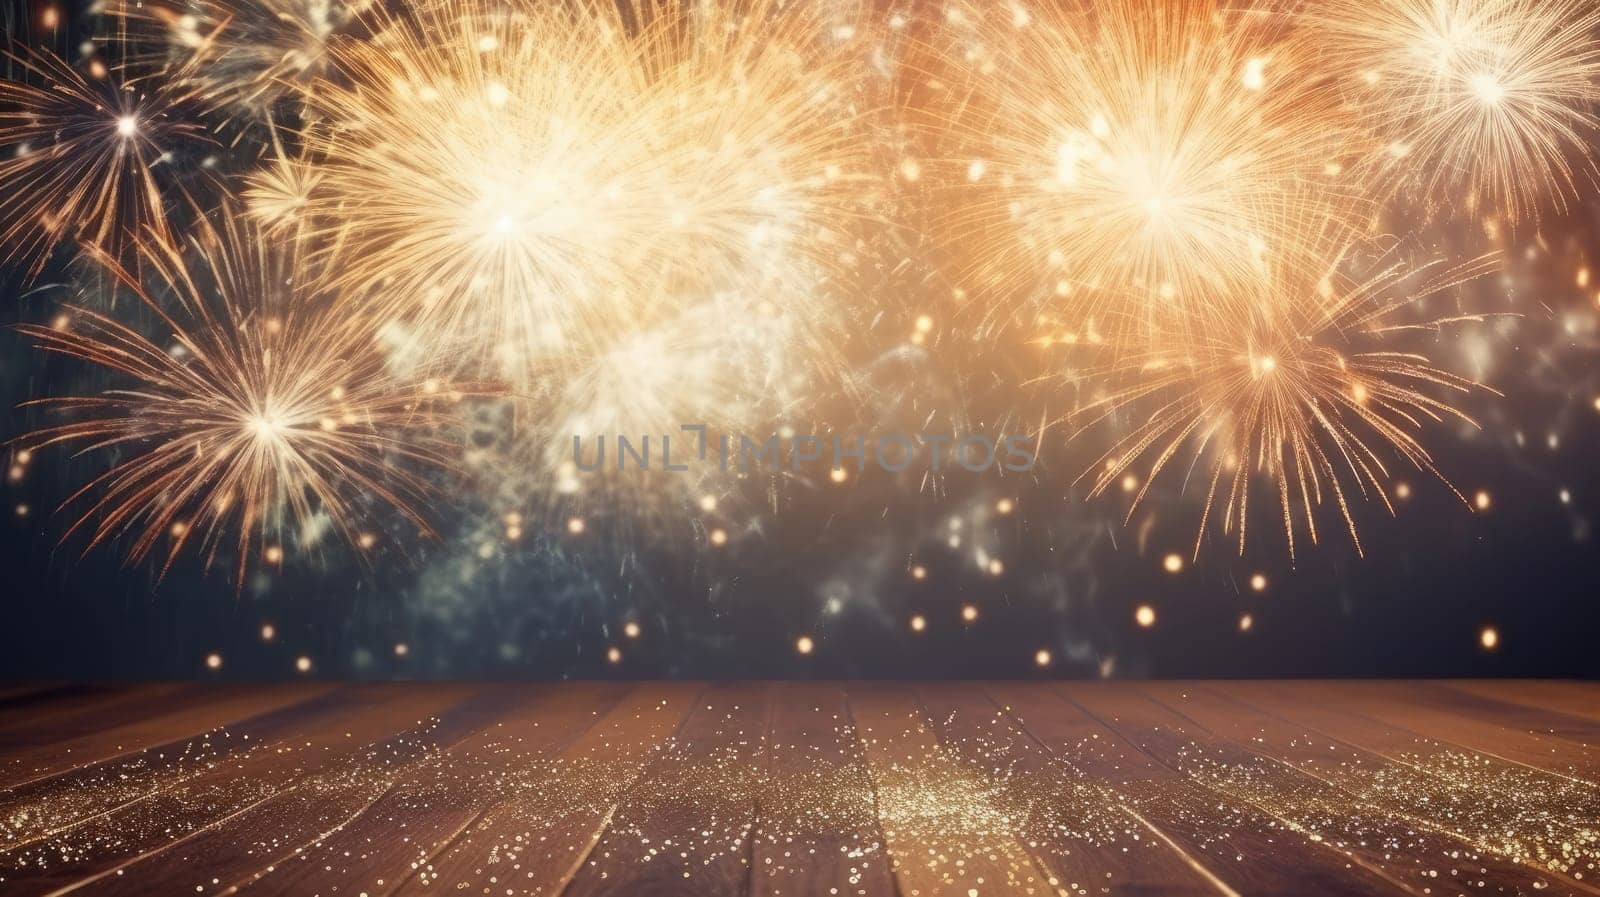 Wooden table or floor empty with new year firework in background comeliness by biancoblue